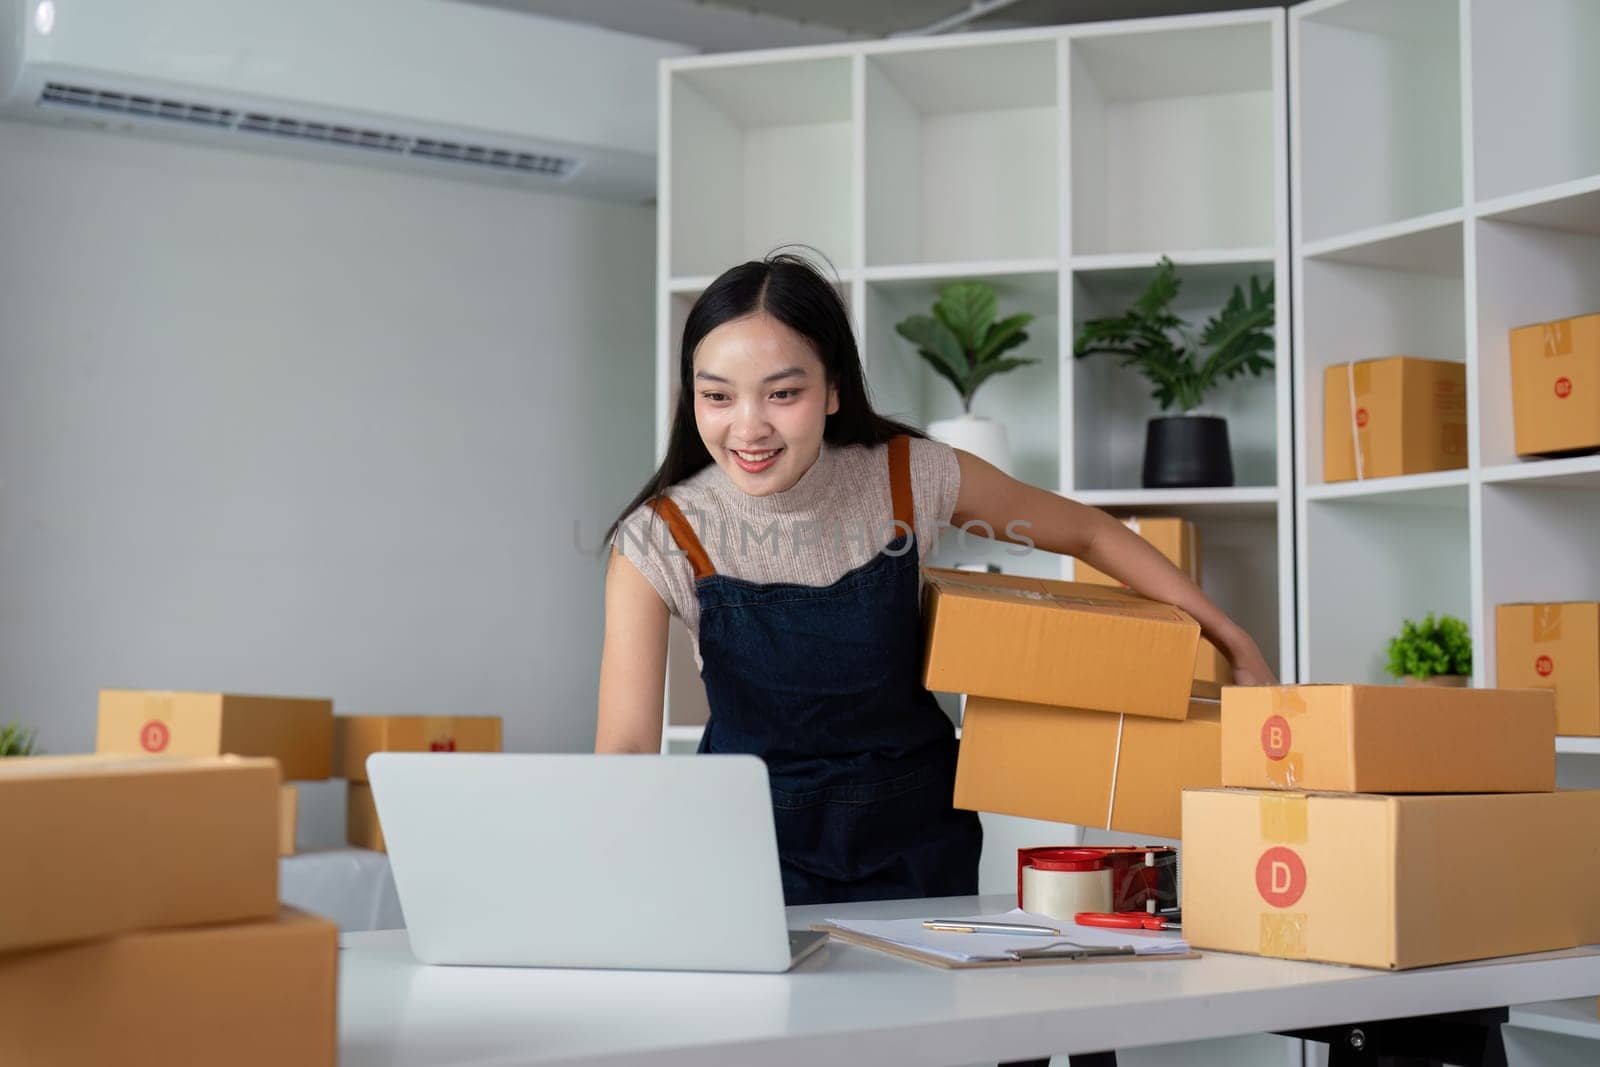 Startup small business entrepreneur of freelance Asian woman using laptop and box to receive and review order online to prepare to pack sell to customer, online business ideas.